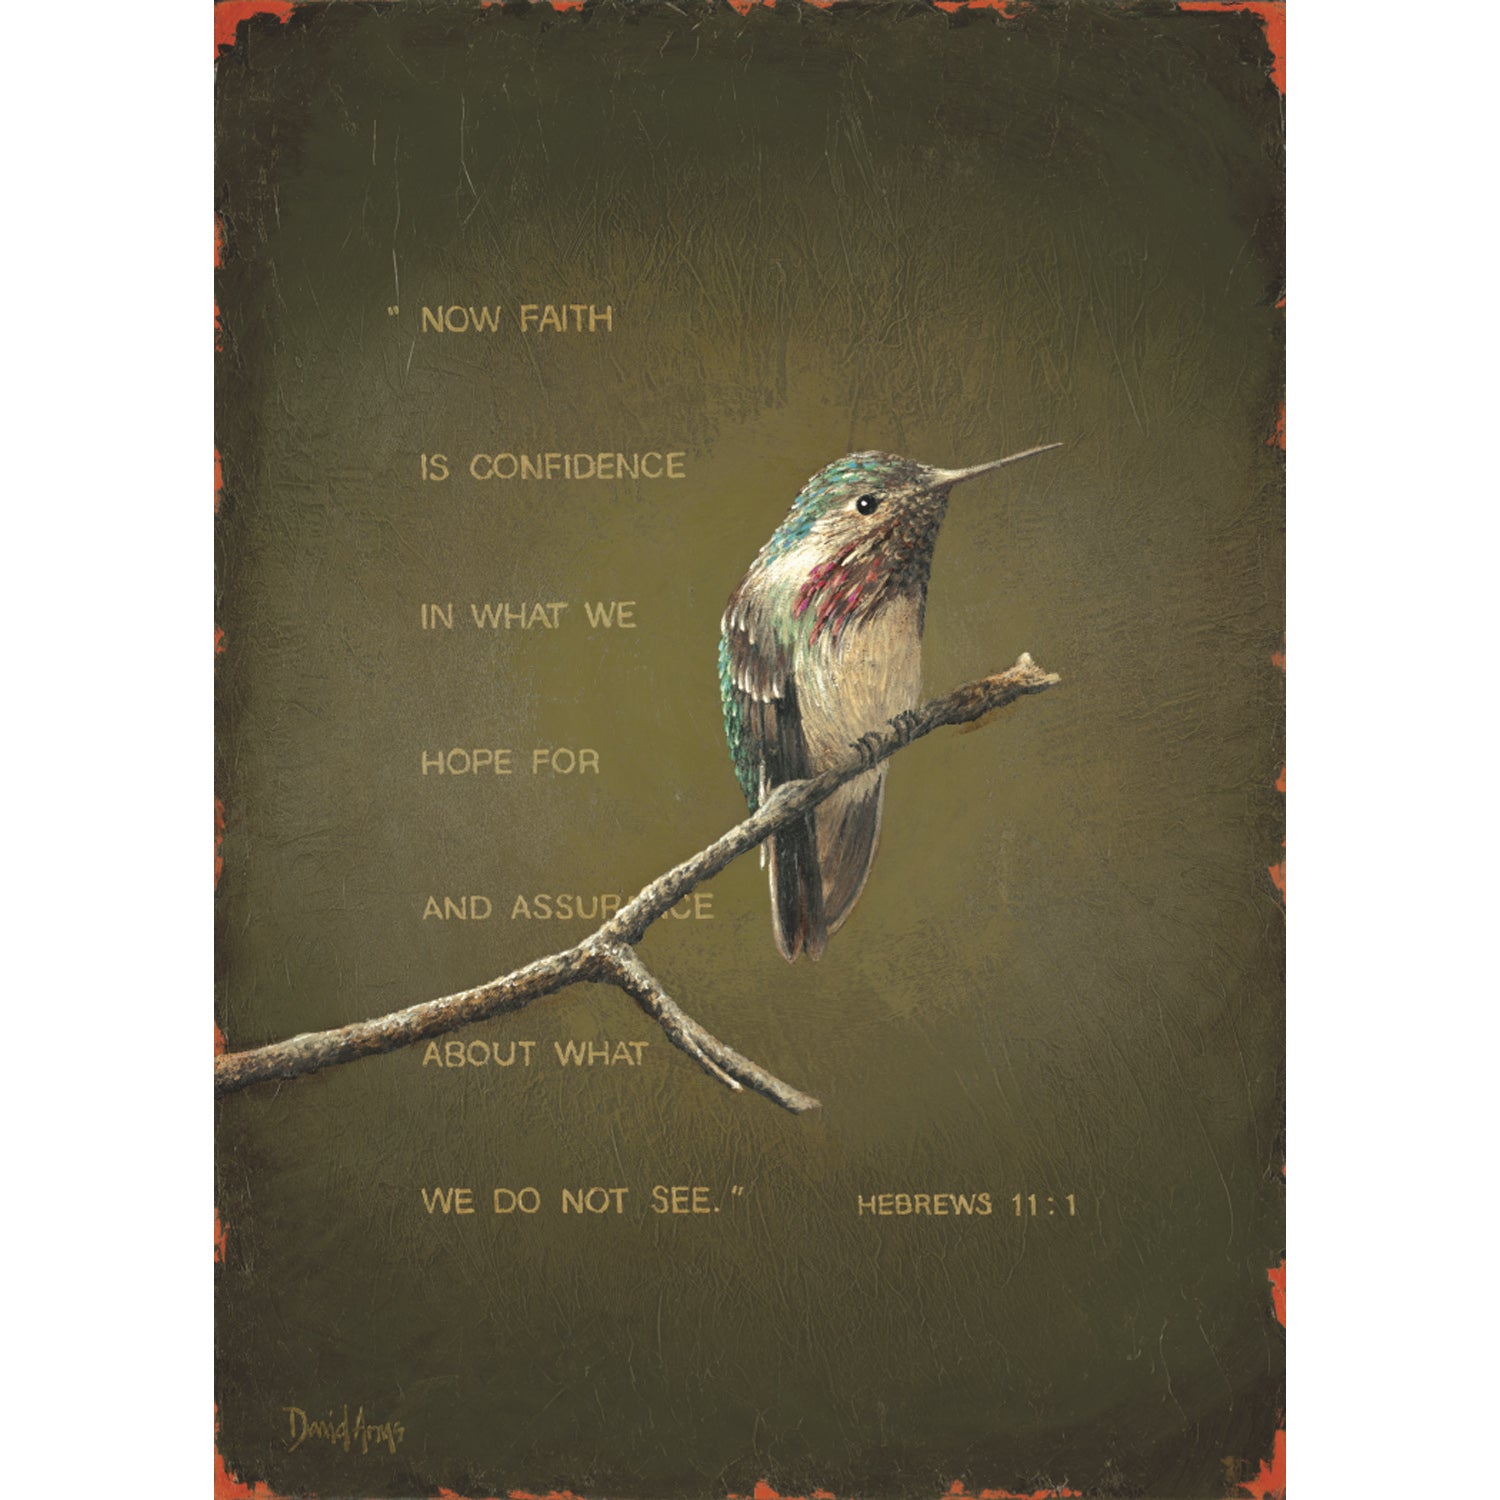 A confident humminbird sitting on a branch with assurance, the Hester &amp; Cook Faith Card.